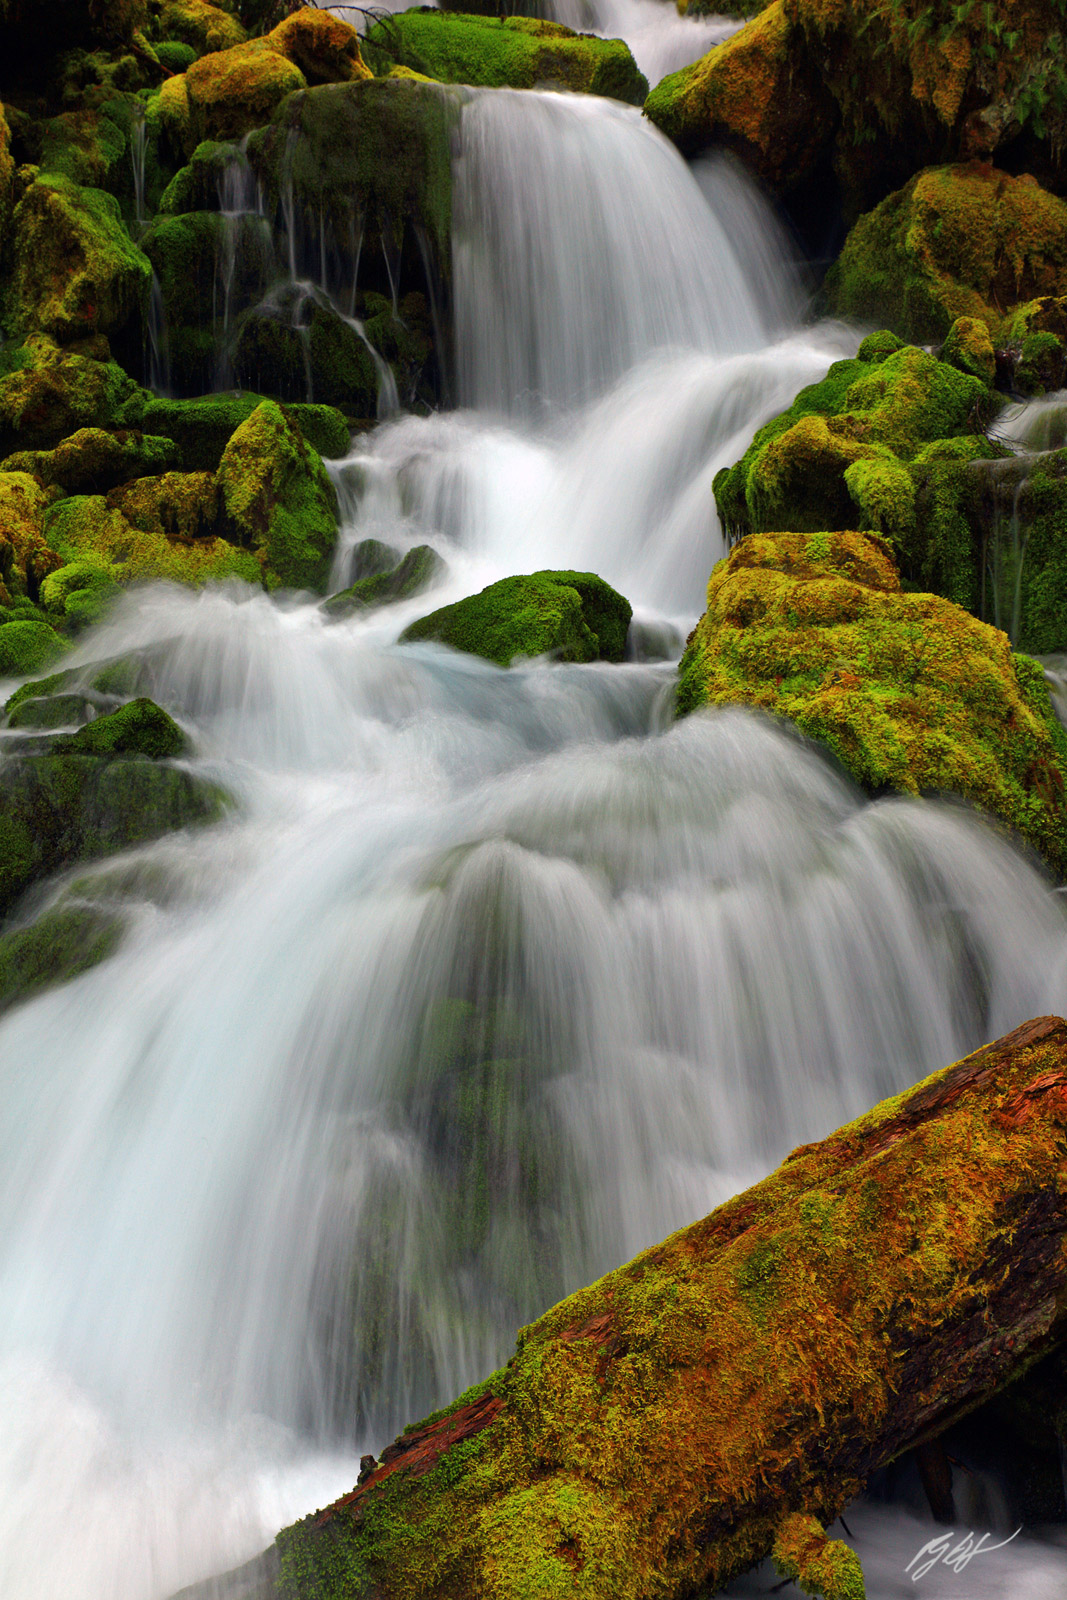 A Magic Secret Waterfall in the Gifford Pinchot National Forest in Southern Washington